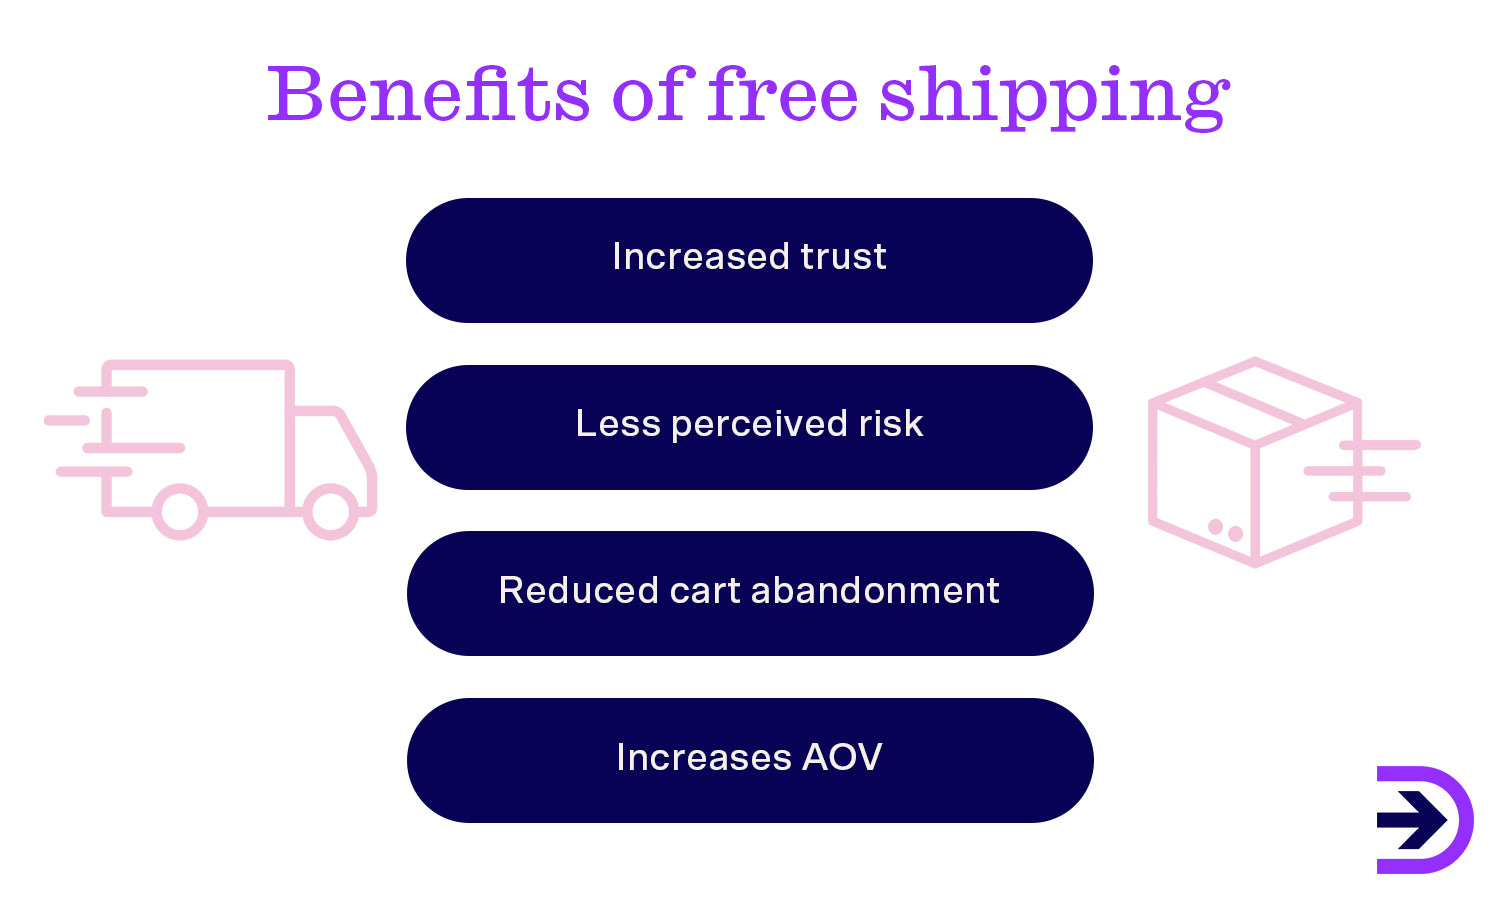 Free shipping is expected by customers when online shopping and there are many benefits for the business.